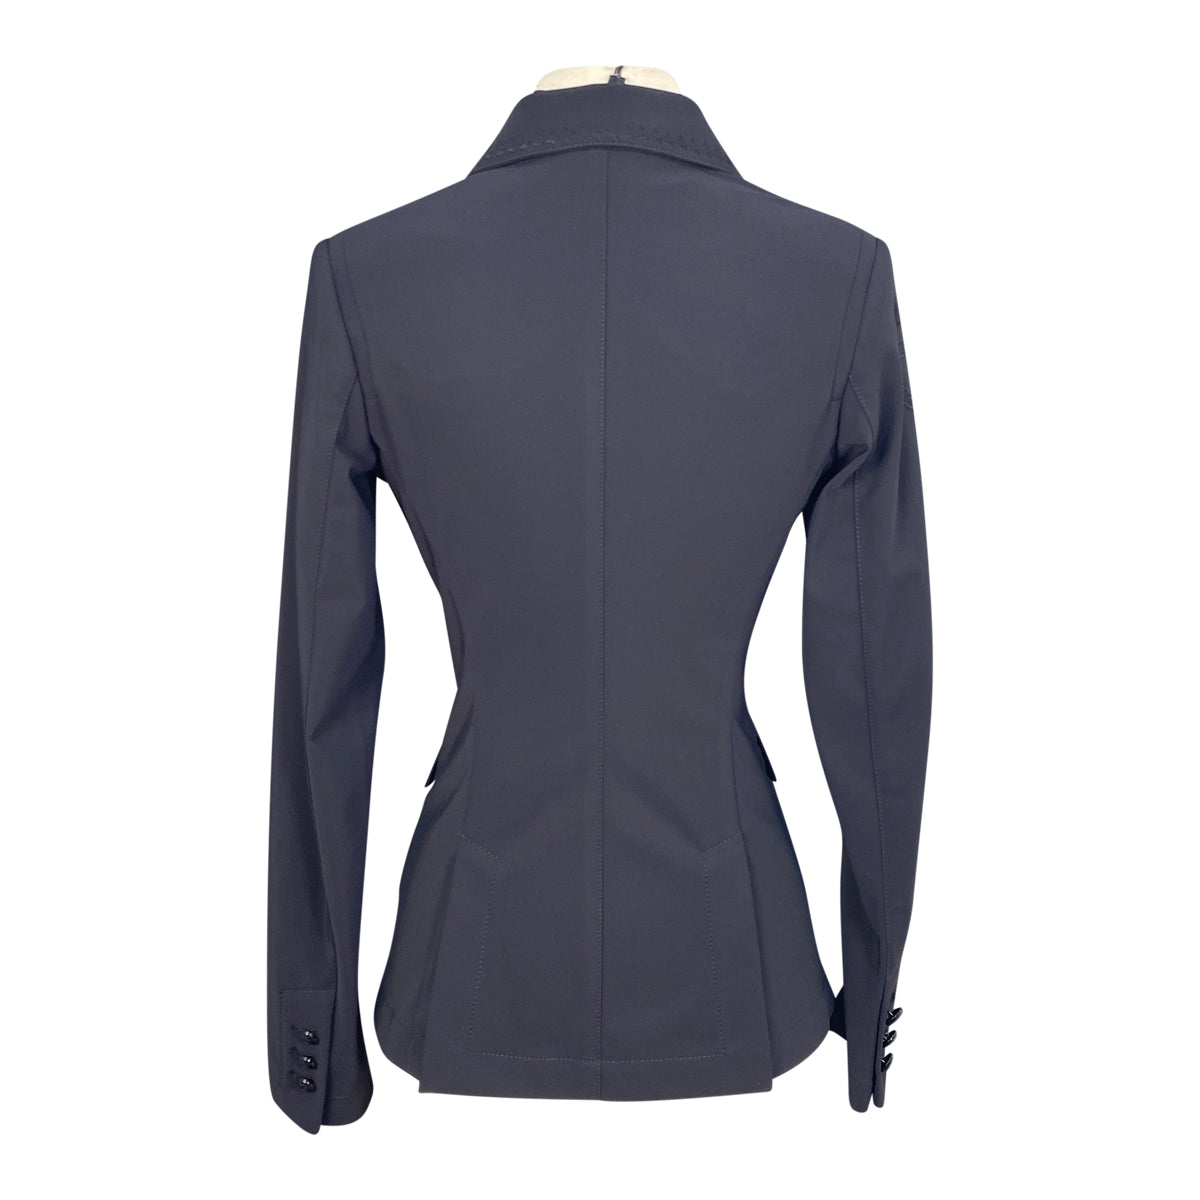 Cavalleria Toscana Embroidered Show Jacket in Black